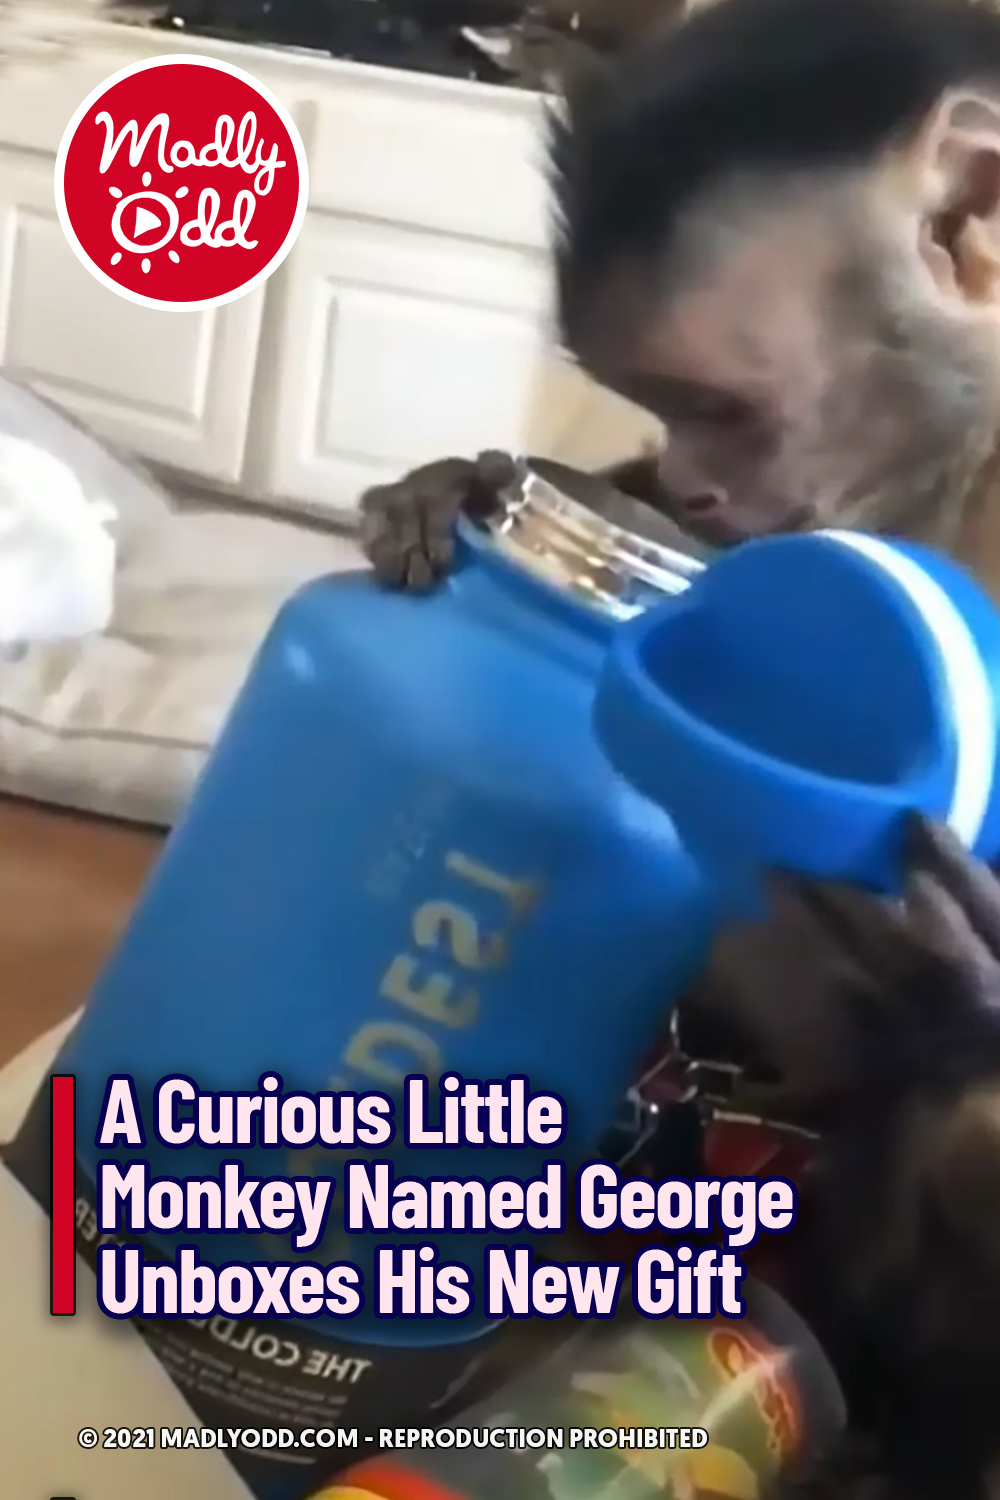 A Curious Little Monkey Named George Unboxes His New Gift